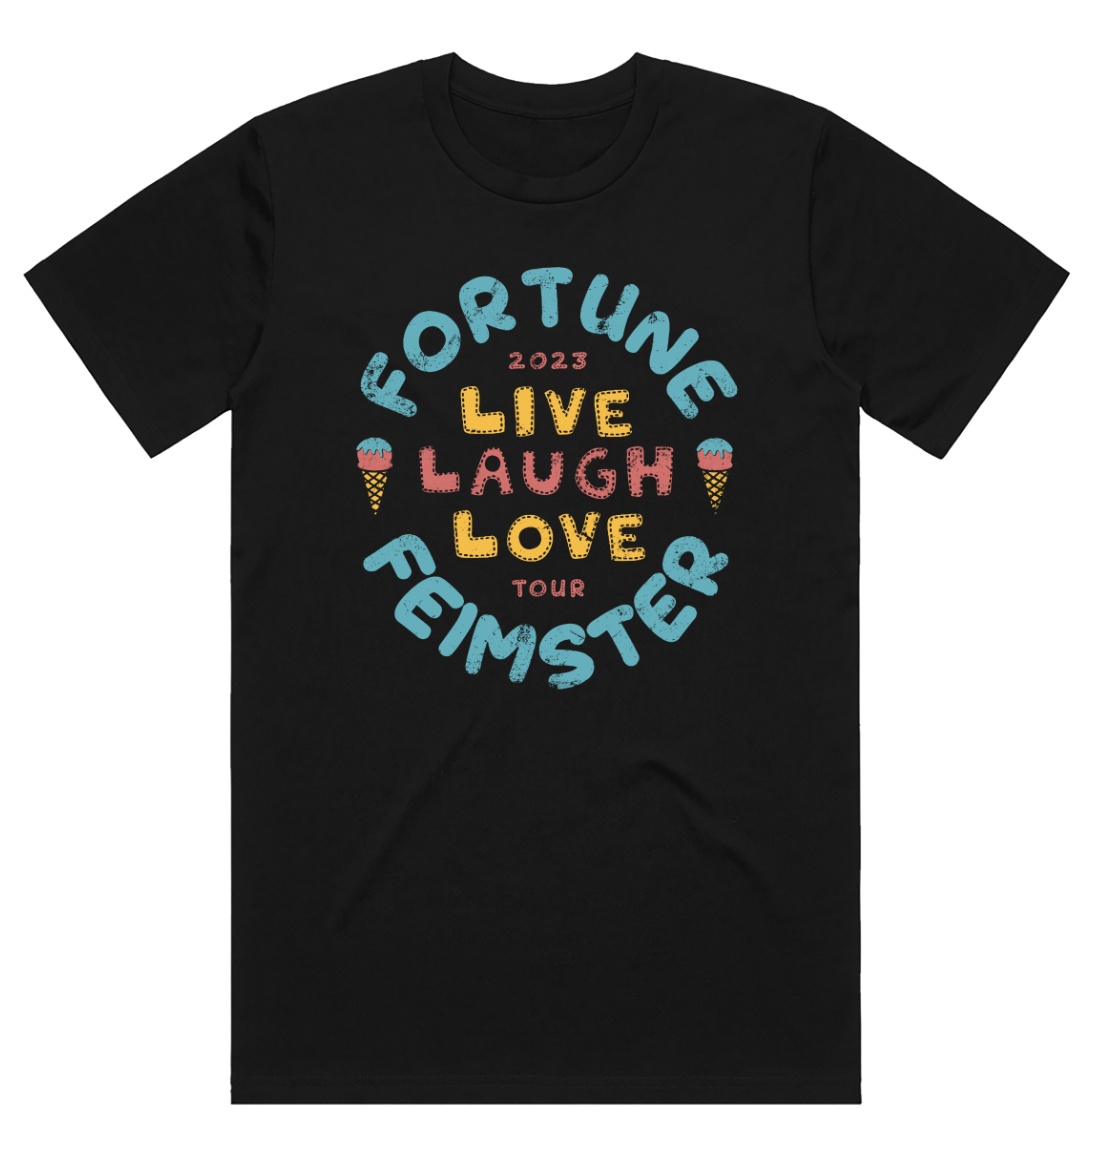 The Live Laugh Love Tour Tee features a sweet ice cream design on the front and Fortune's 2023 tour dates on the back!